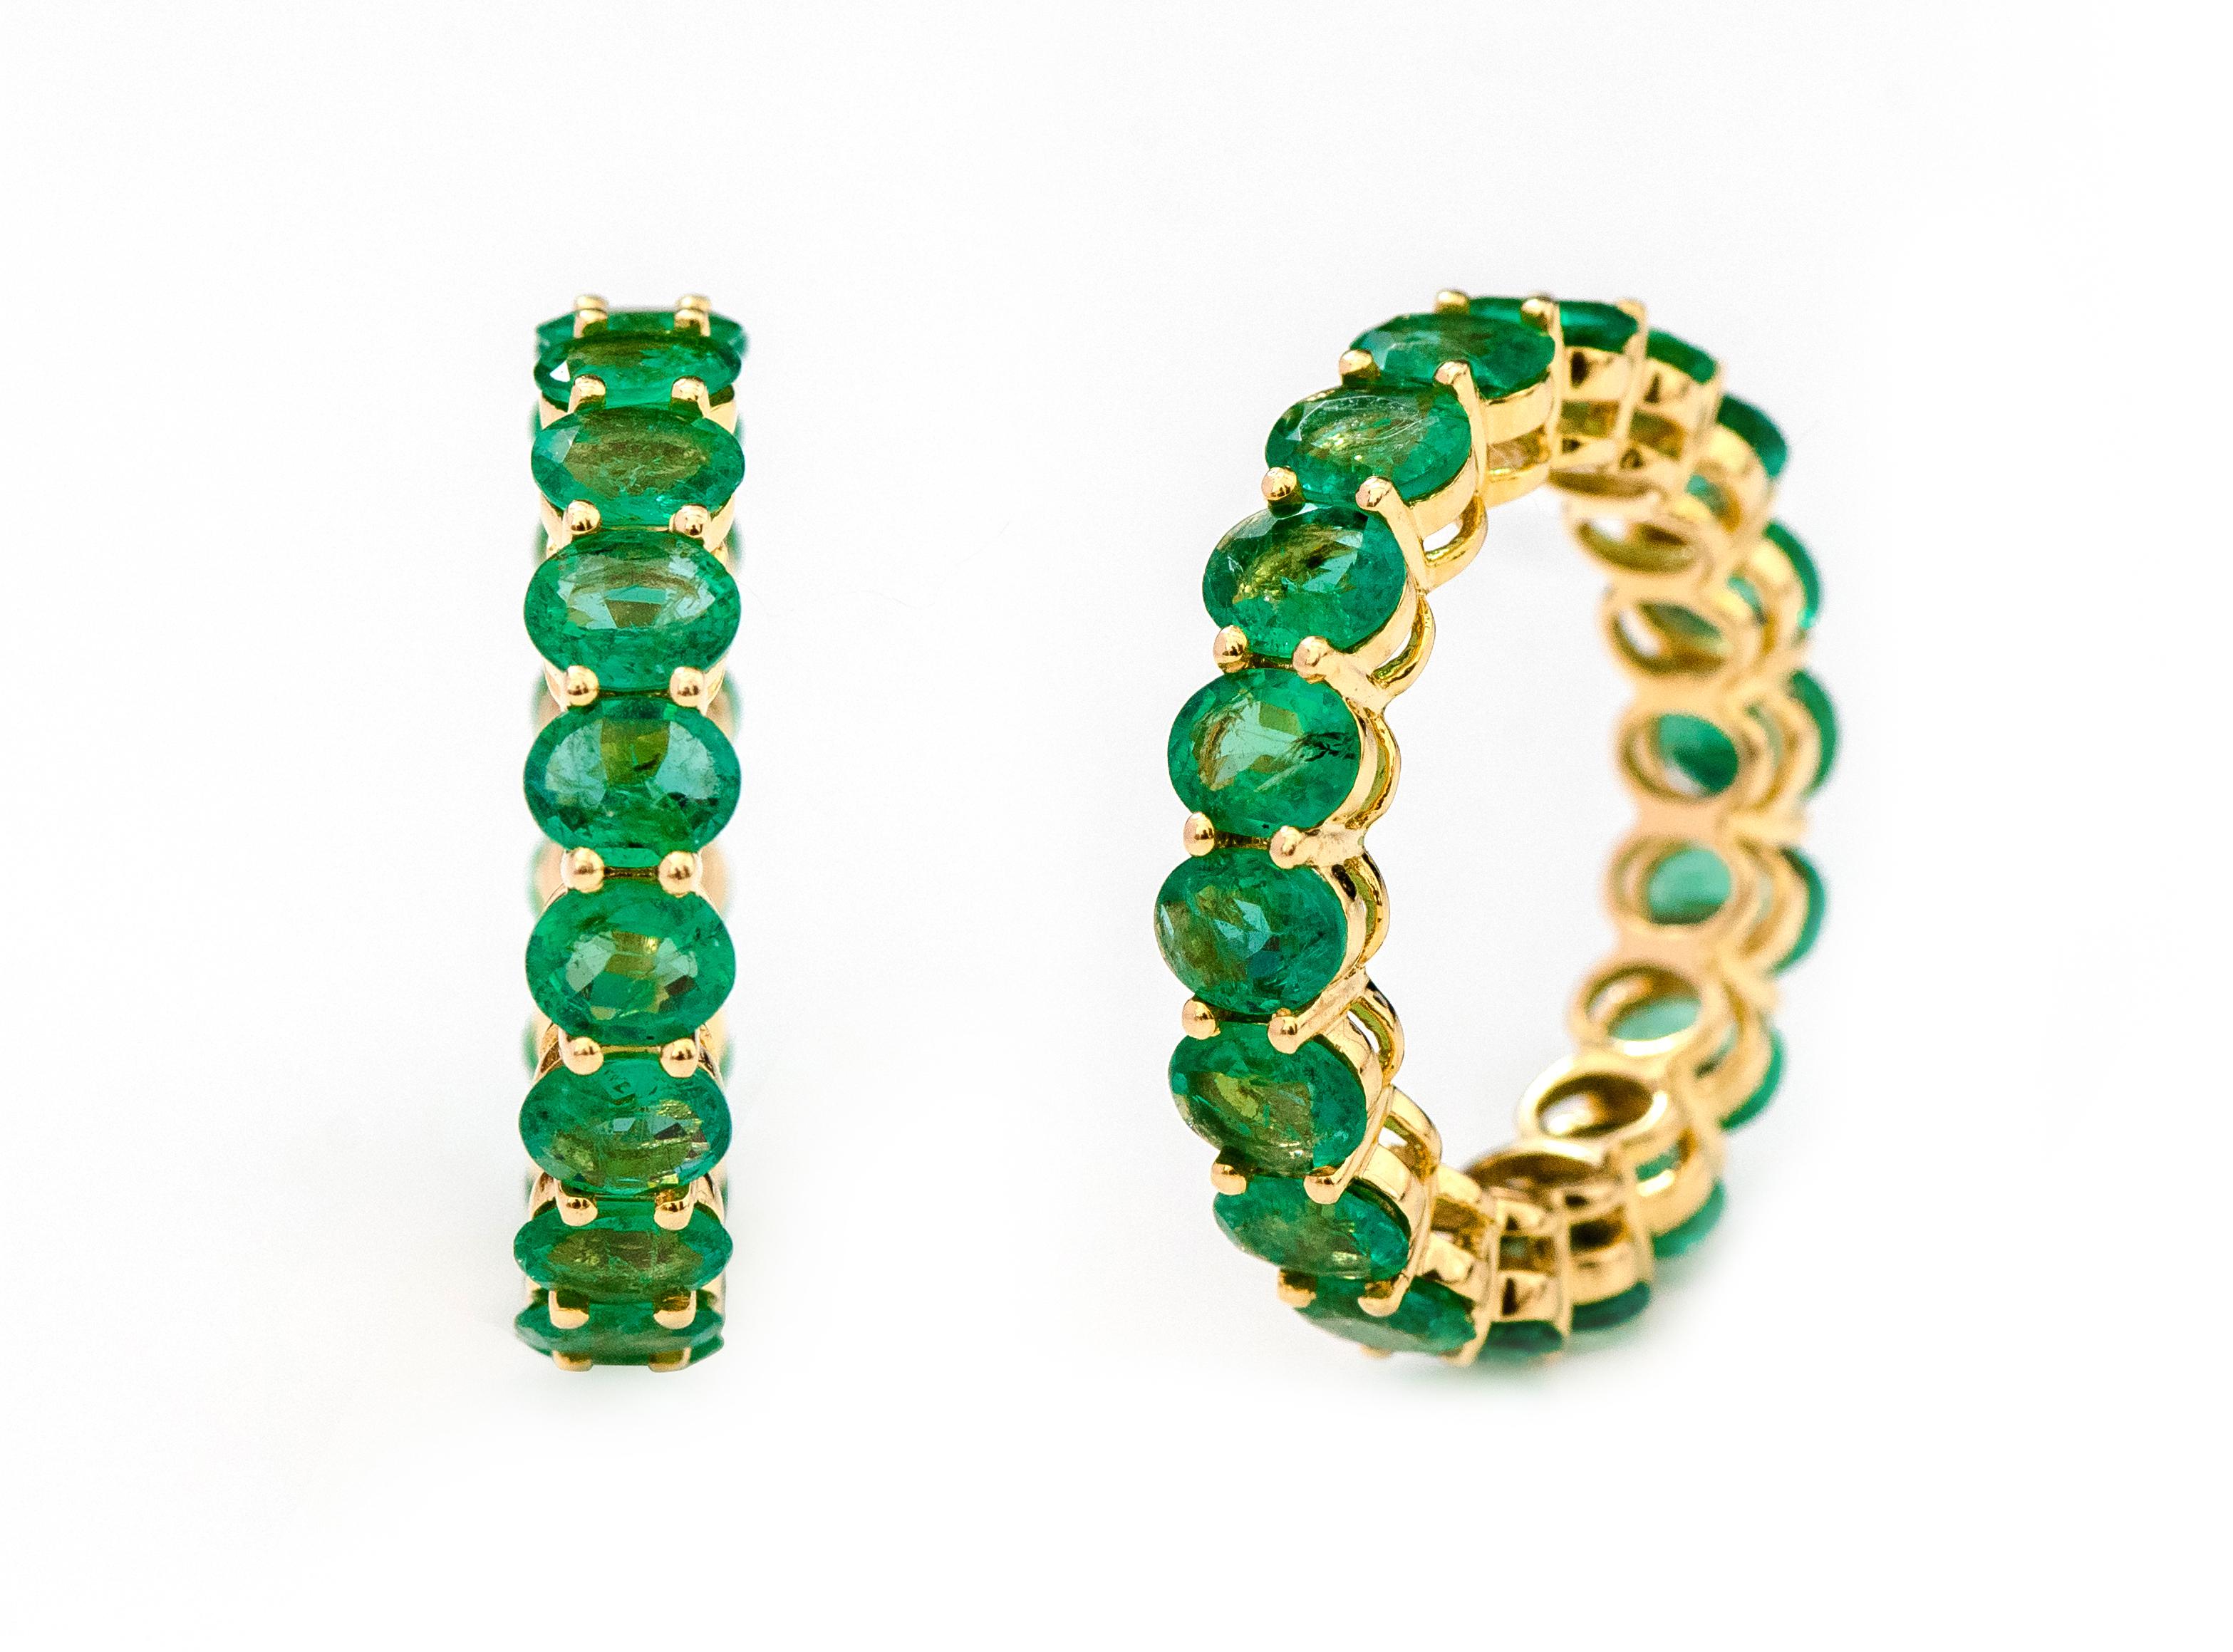 18 Karat Yellow Gold 40 Pointers Oval-Cut Natural Emerald Eternity Band Ring

This glorious emerald band is sensational. The solitaire horizontally placed oval shape emeralds in grain prong yellow gold setting is timeless. The ideally cut, size, and